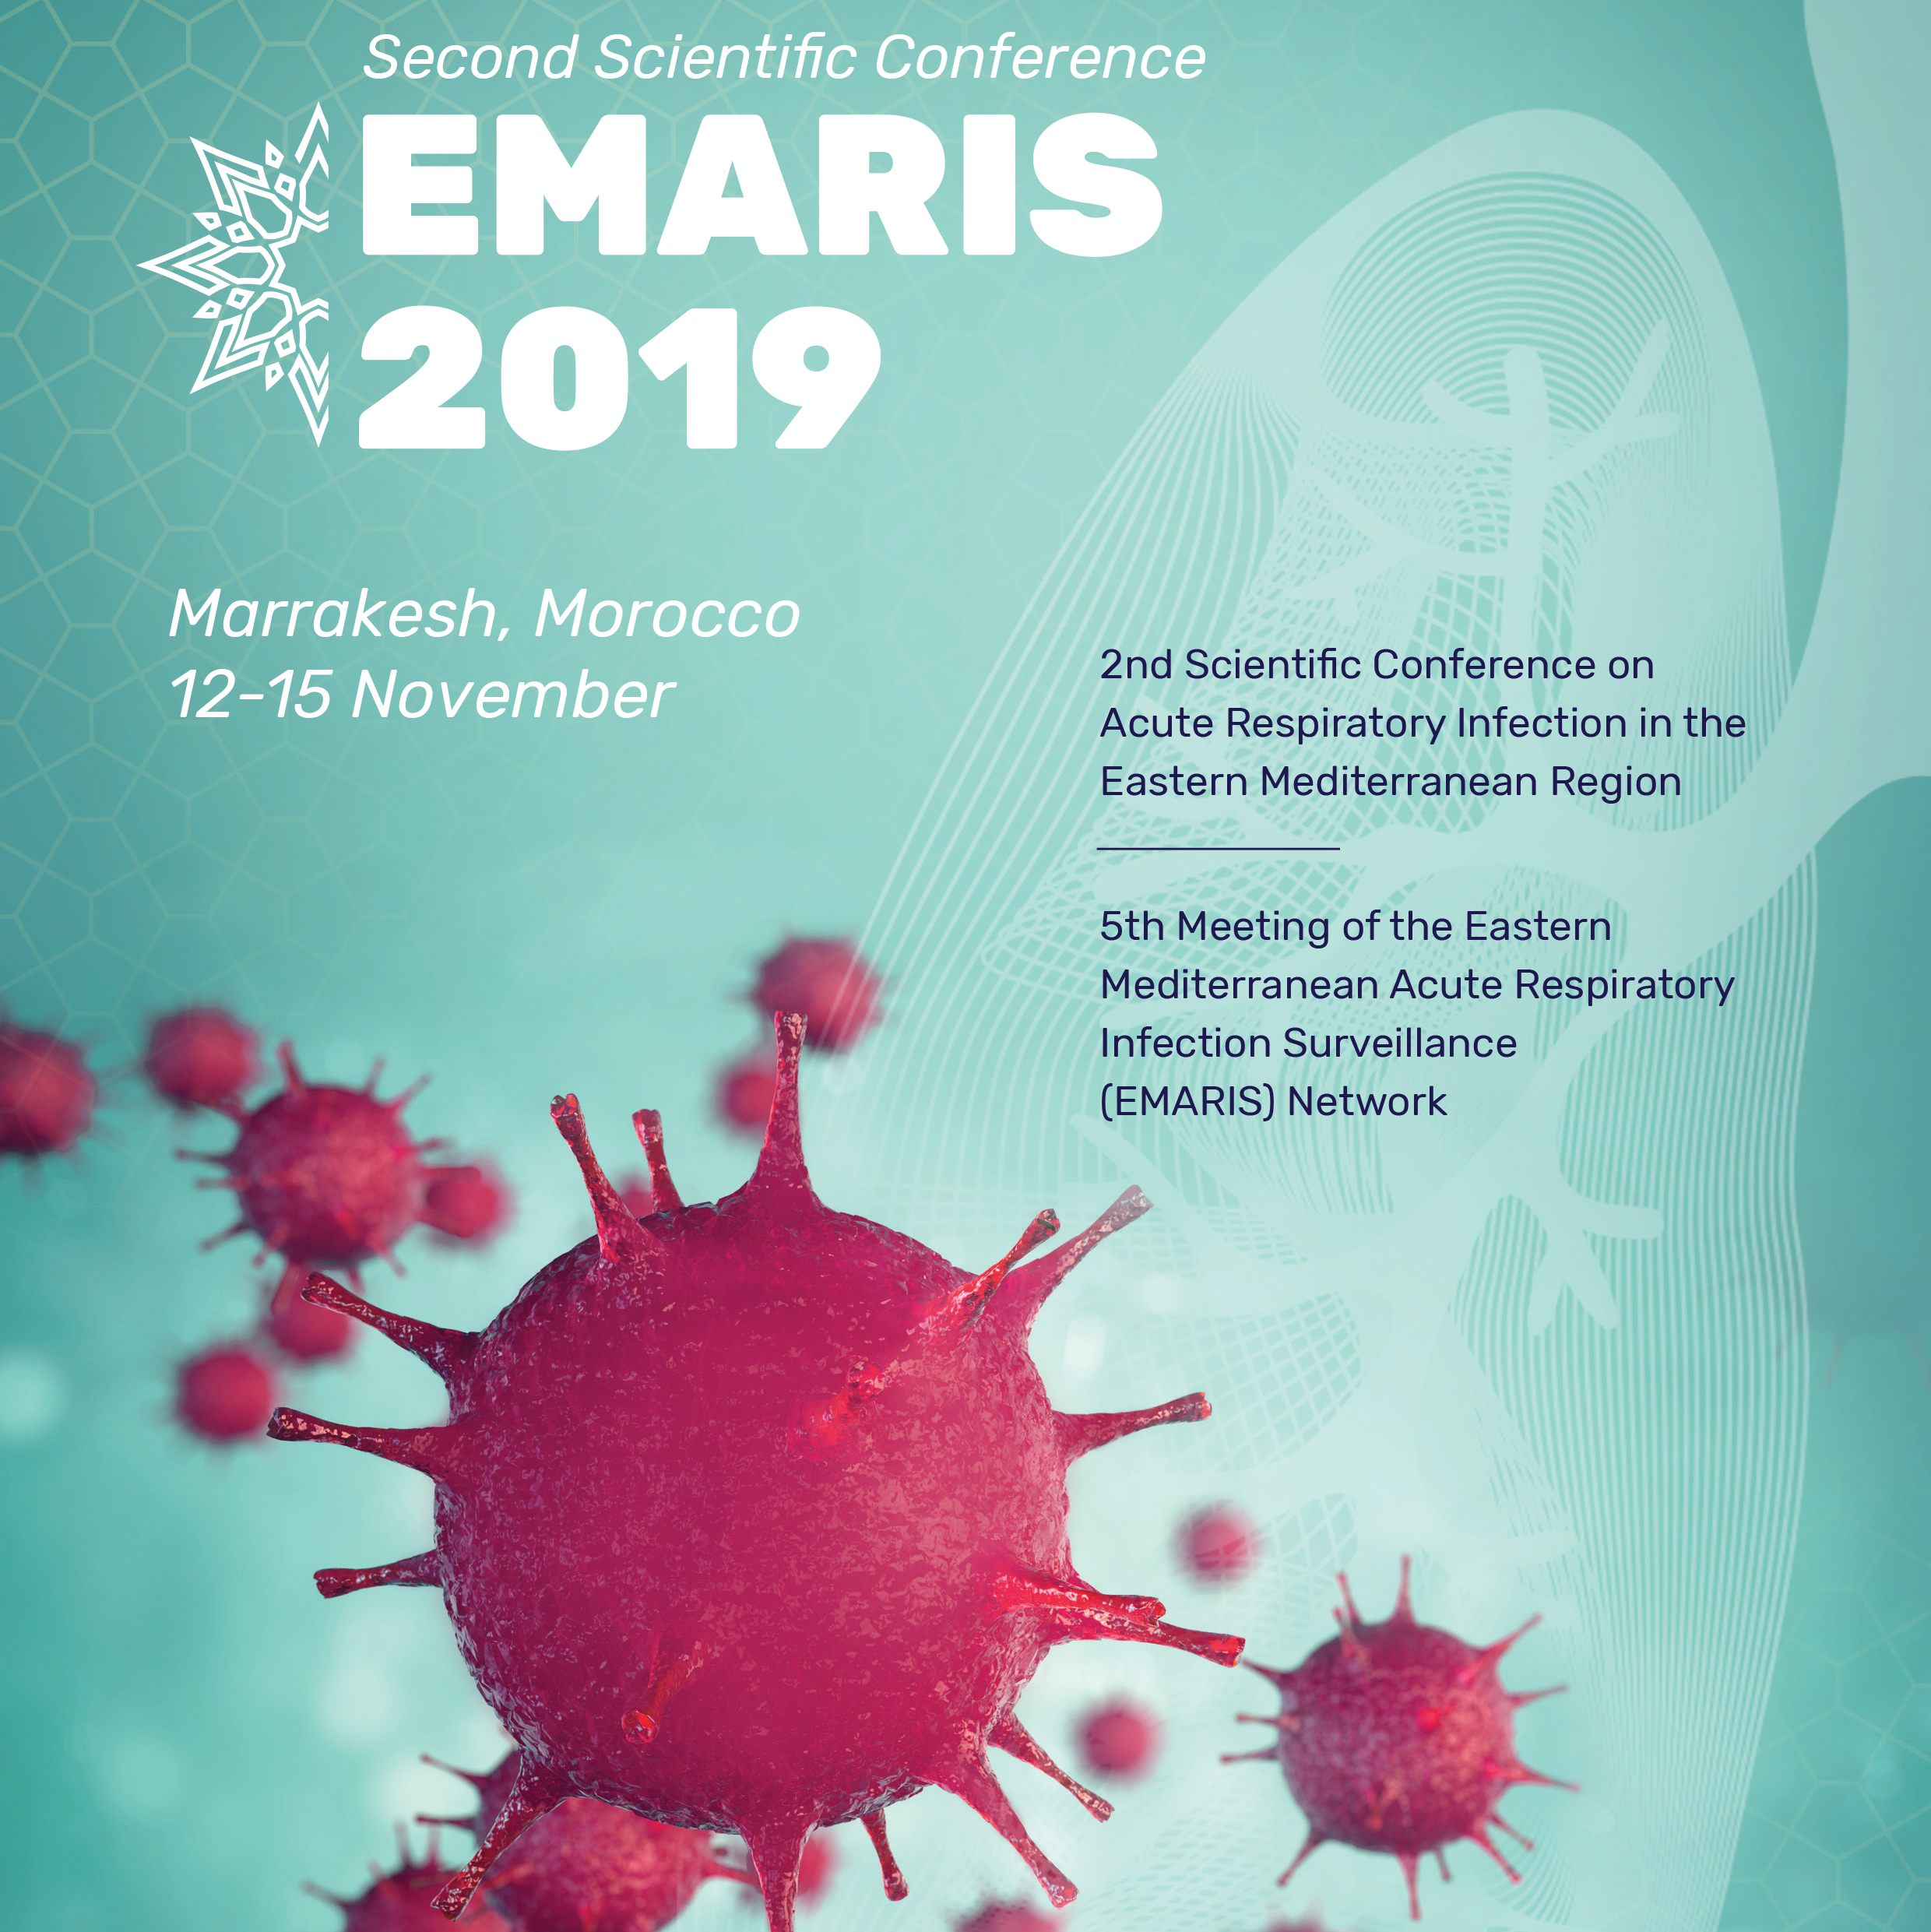 Opening soon: abstract submission process for Second Scientific Conference - EMARIS 2019